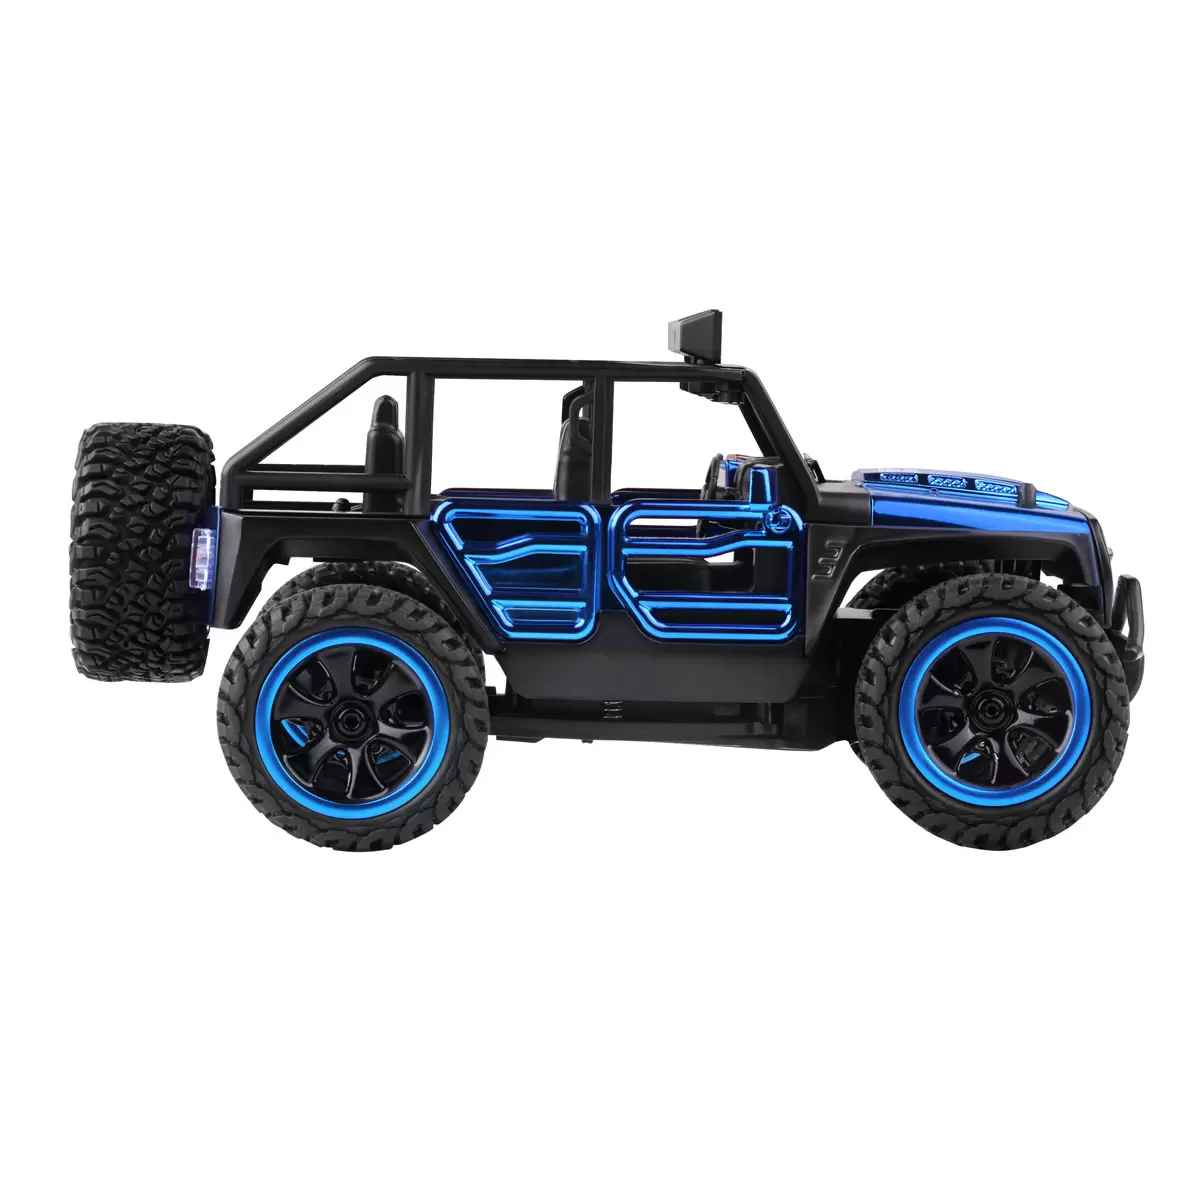 Buy Power Craze High Speed RC in Blue Top Image at Costco.co.uk